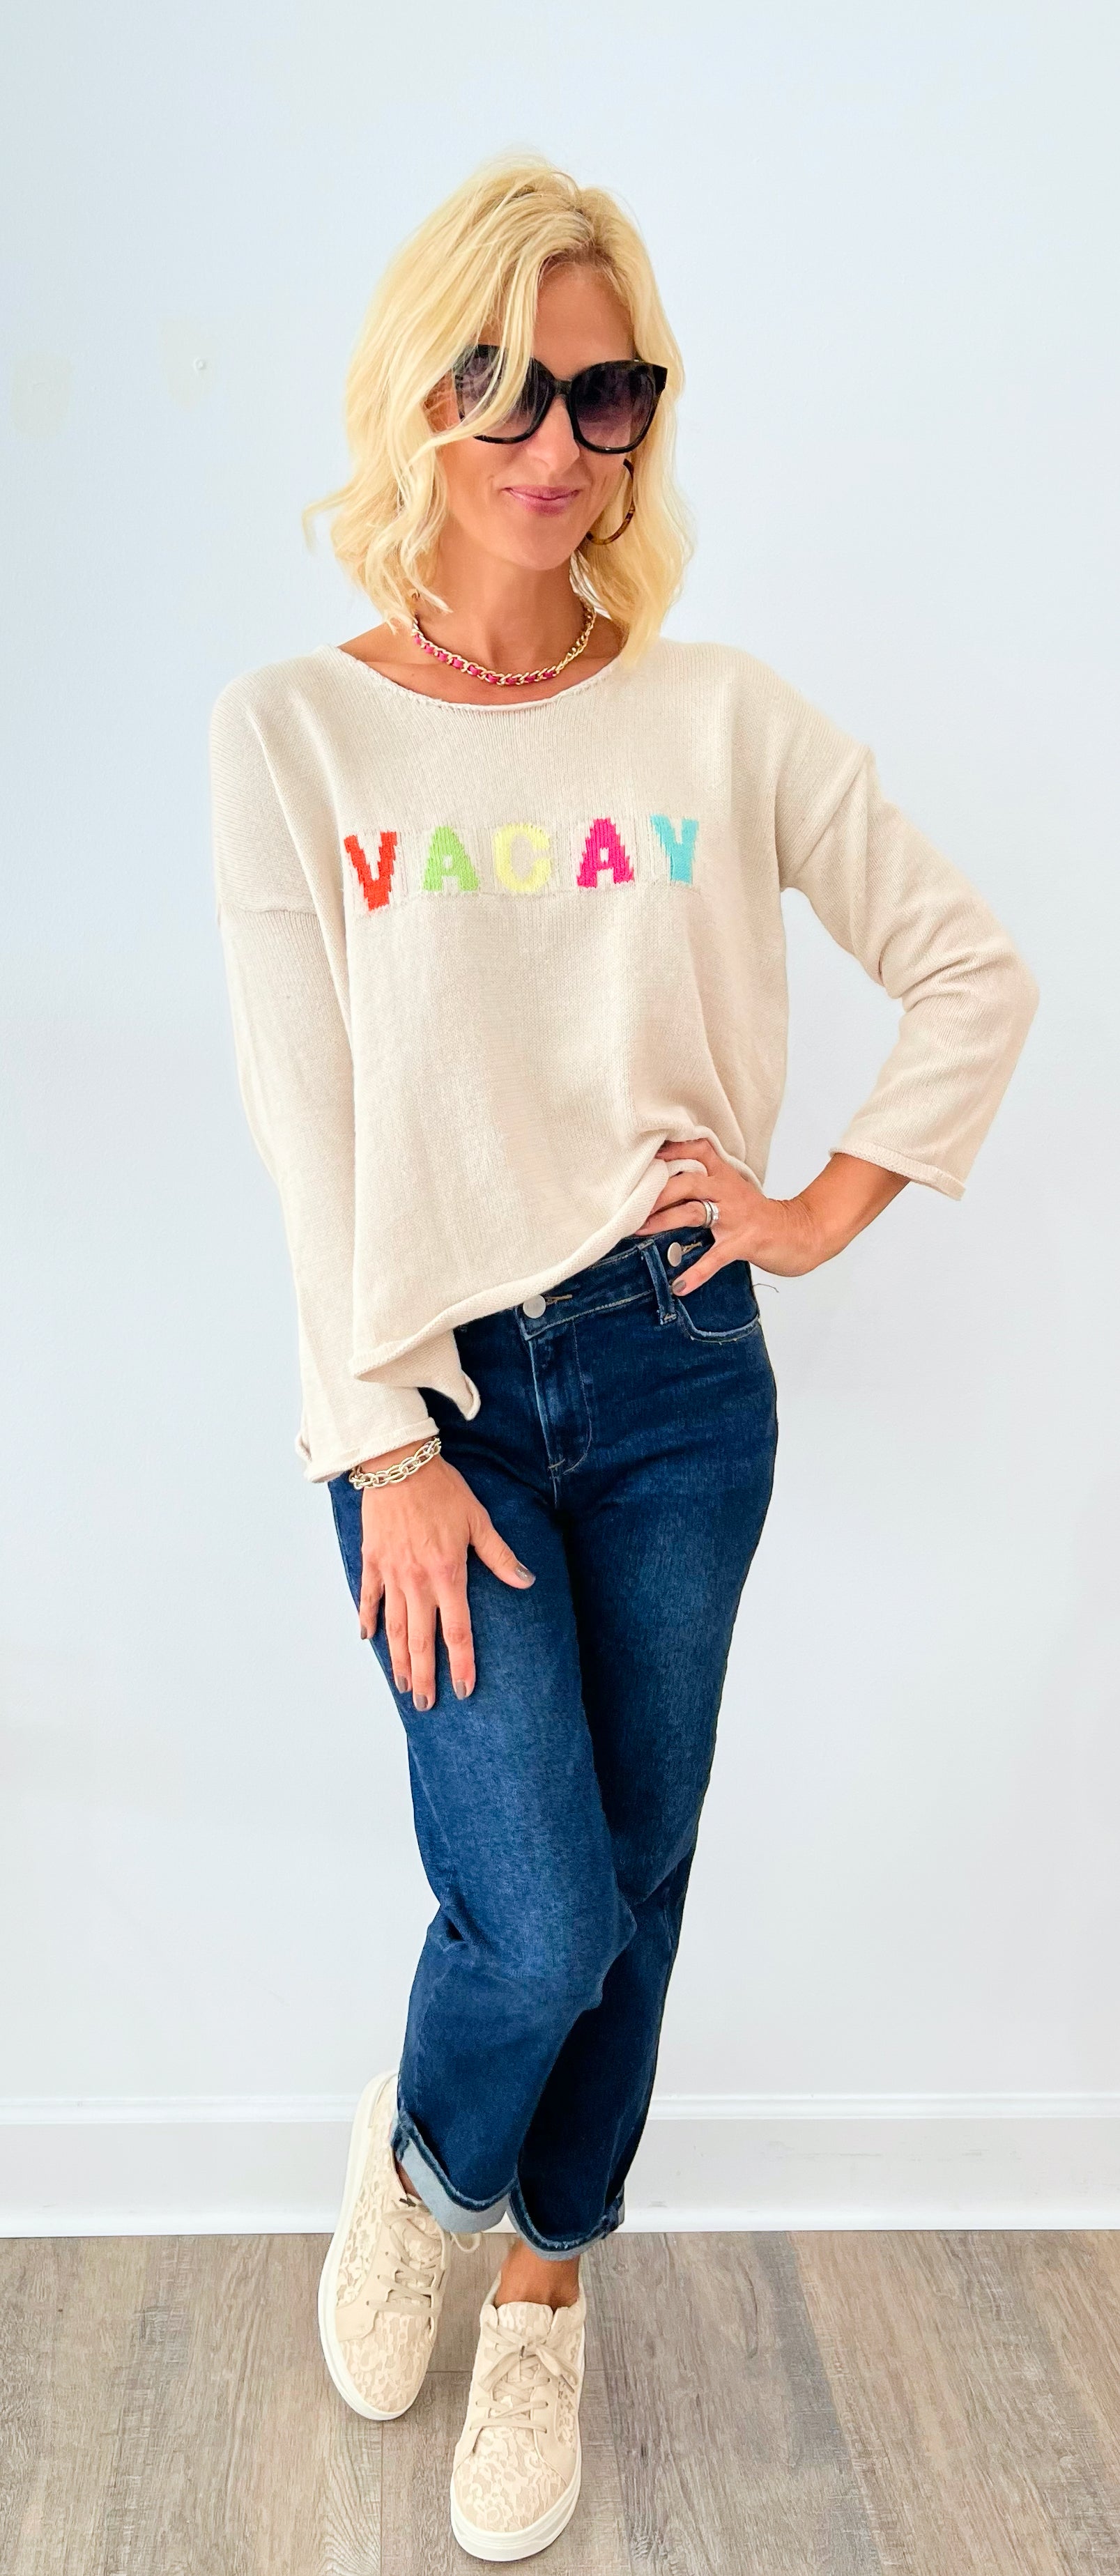 "Vacay" Lightweight Soft Sweater Top - Beige-140 Sweaters-MIRACLE-Coastal Bloom Boutique, find the trendiest versions of the popular styles and looks Located in Indialantic, FL